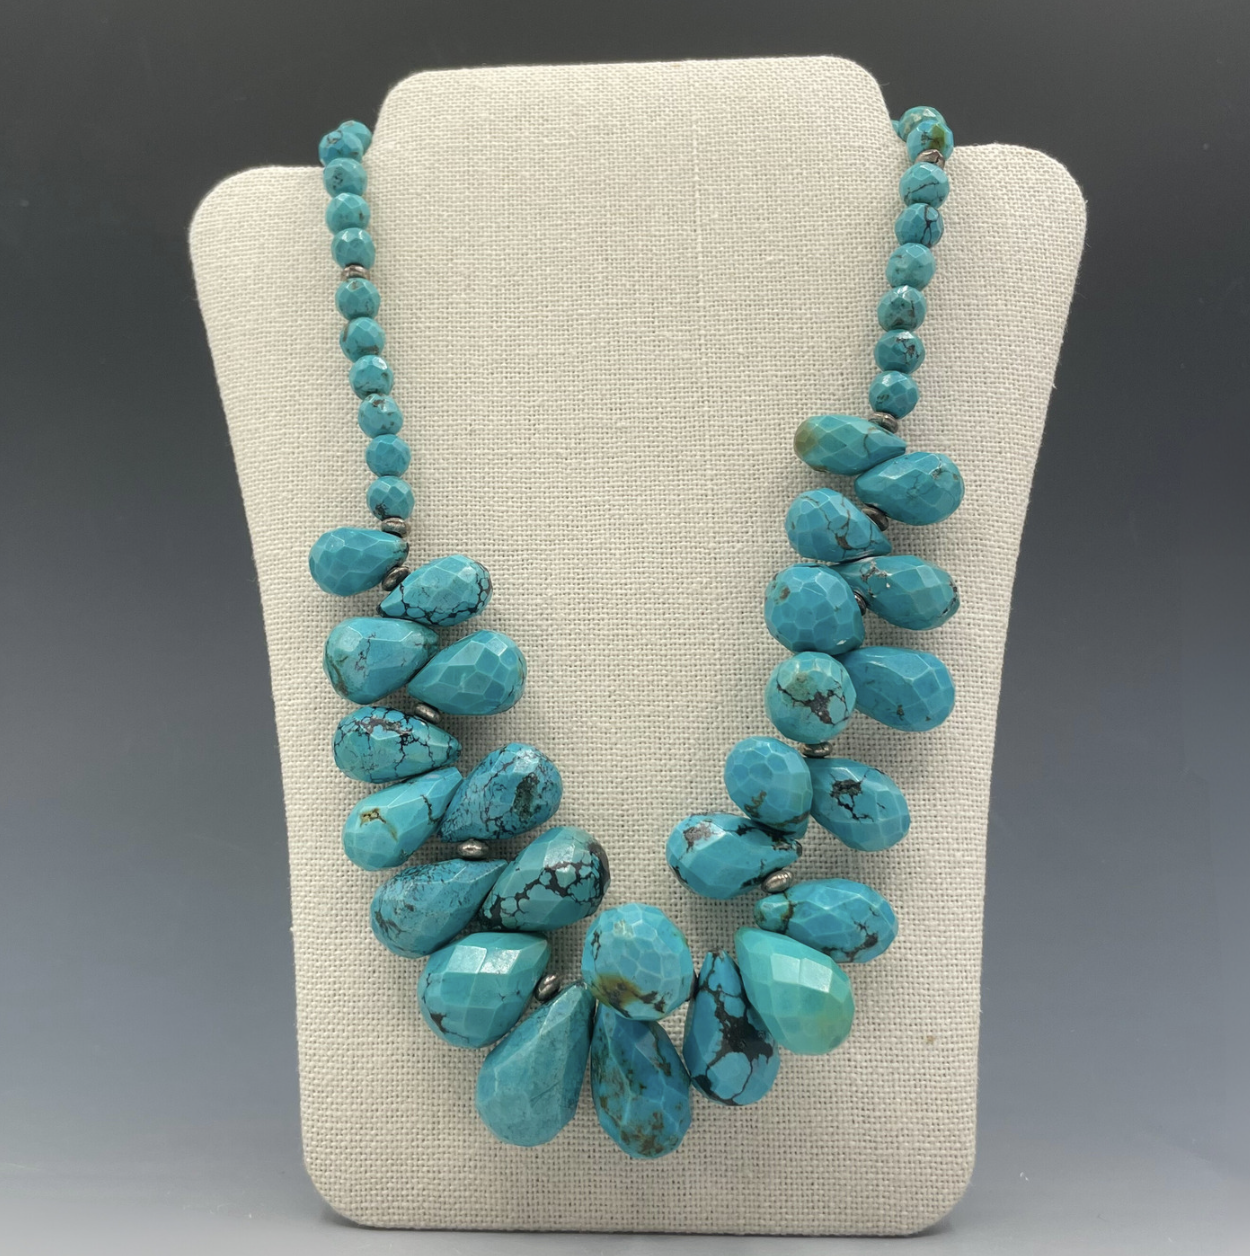 Amazon.com: Chunky Freeform Turquoise Statement Necklace with Metallic  Accents : Handmade Products